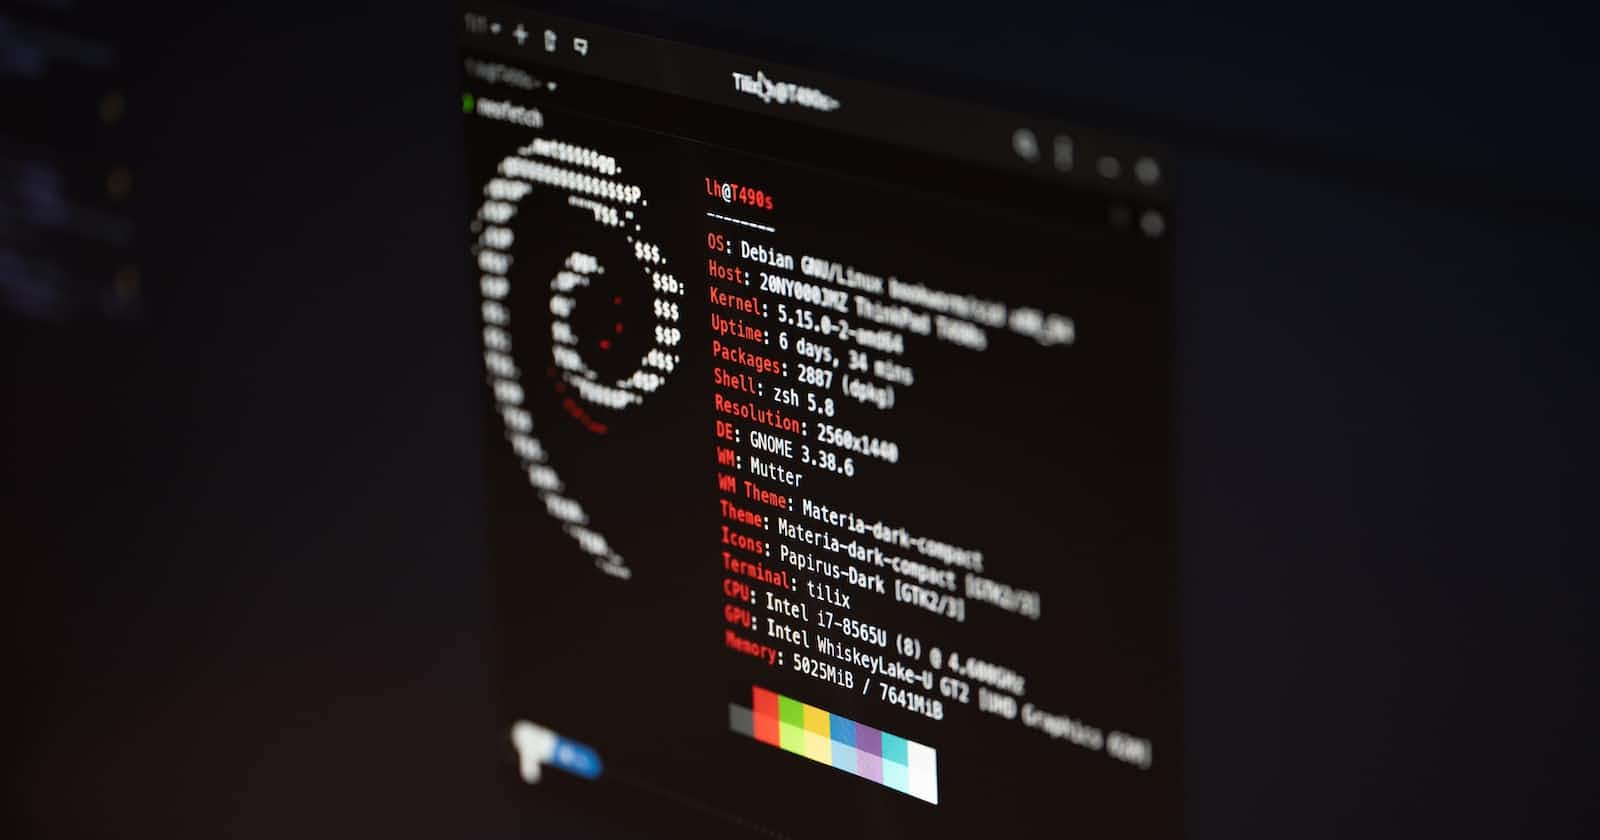 Cool Command Line Tools For Your Linux Terminal!.